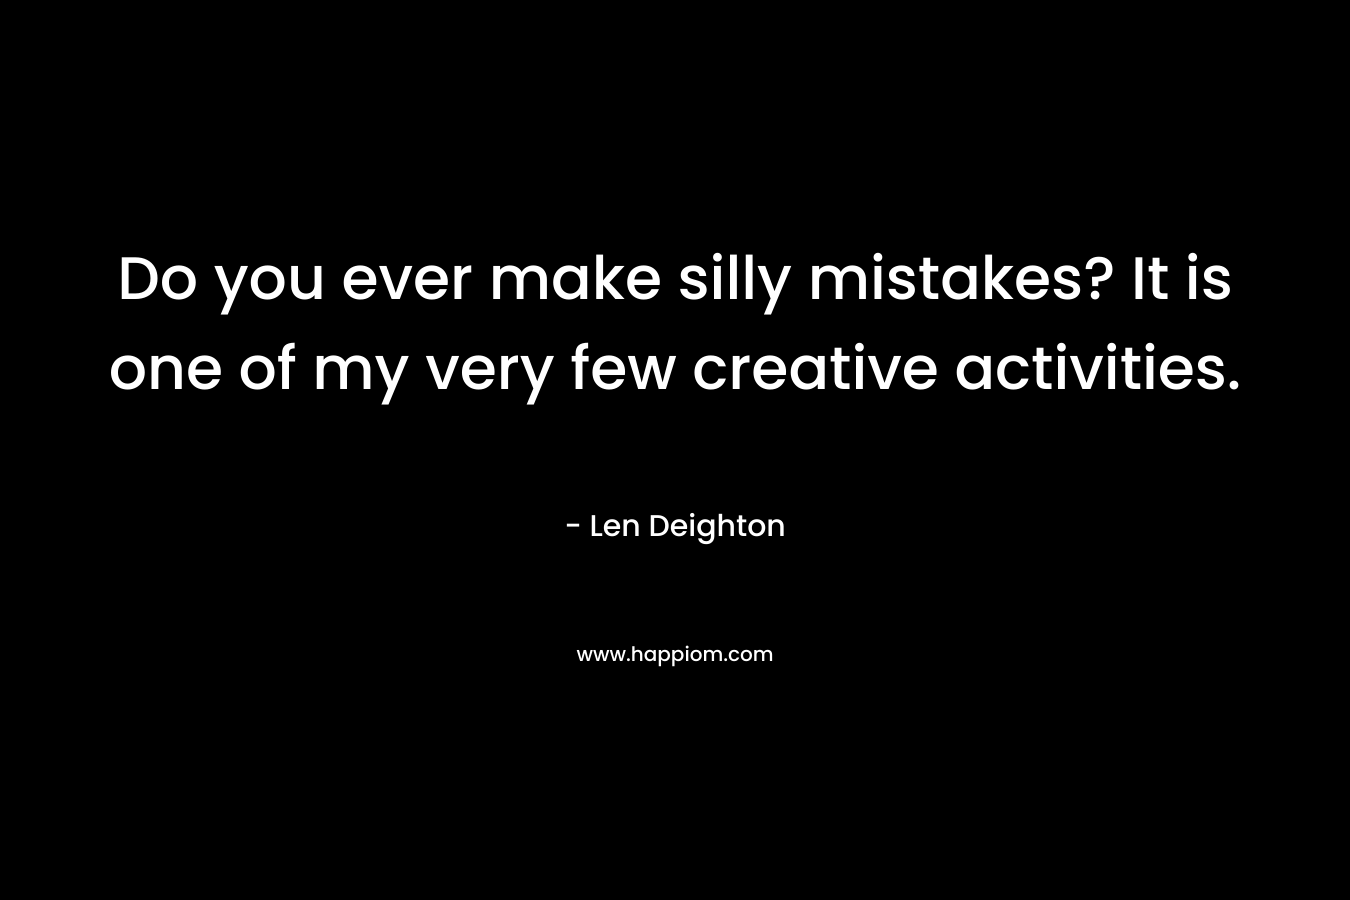 Do you ever make silly mistakes? It is one of my very few creative activities.